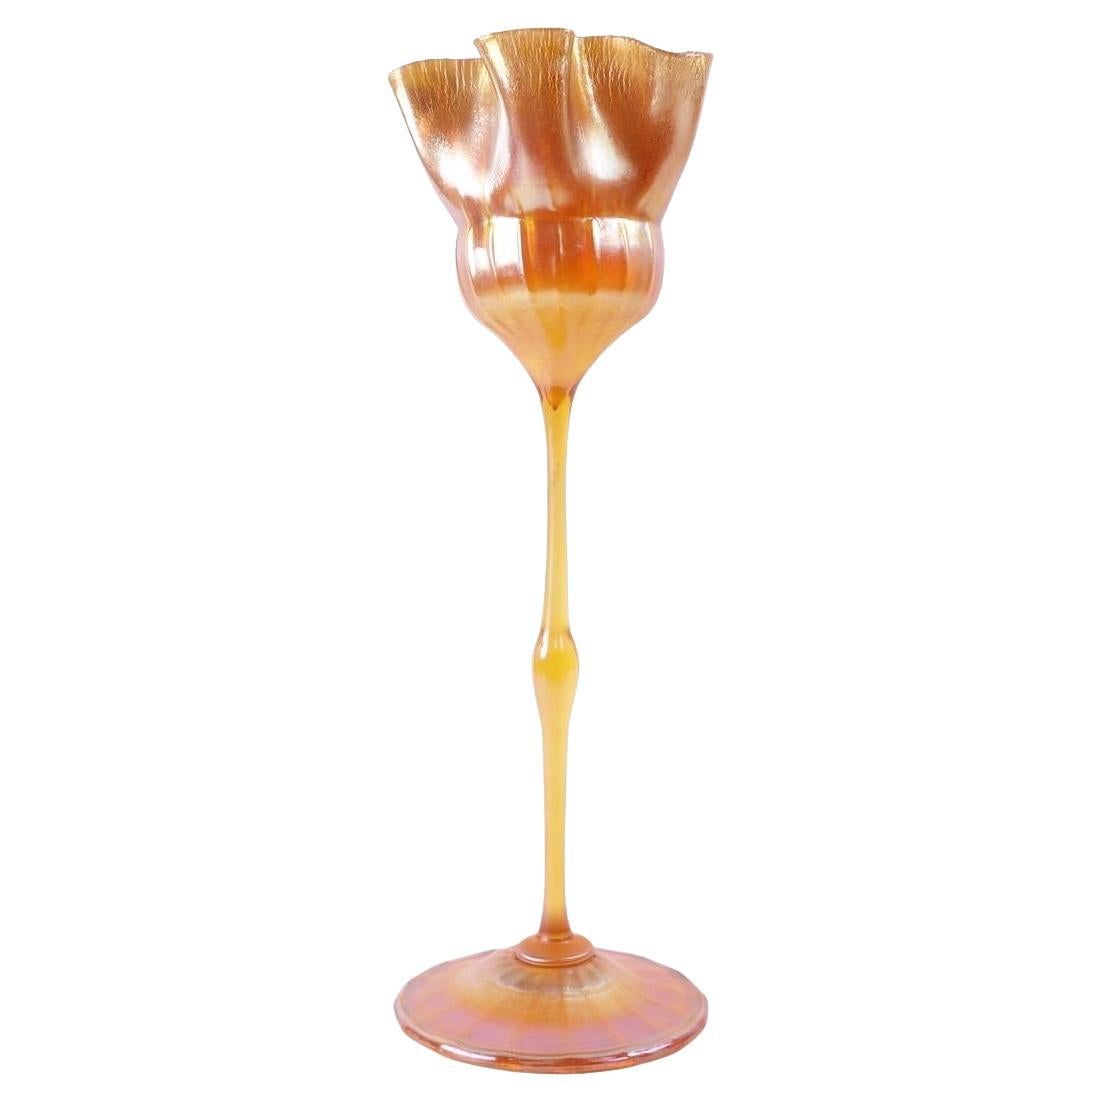 Louis Comfort Tiffany Gold Favrile Art Glass Footed Floriform Vase, LCT - 1906